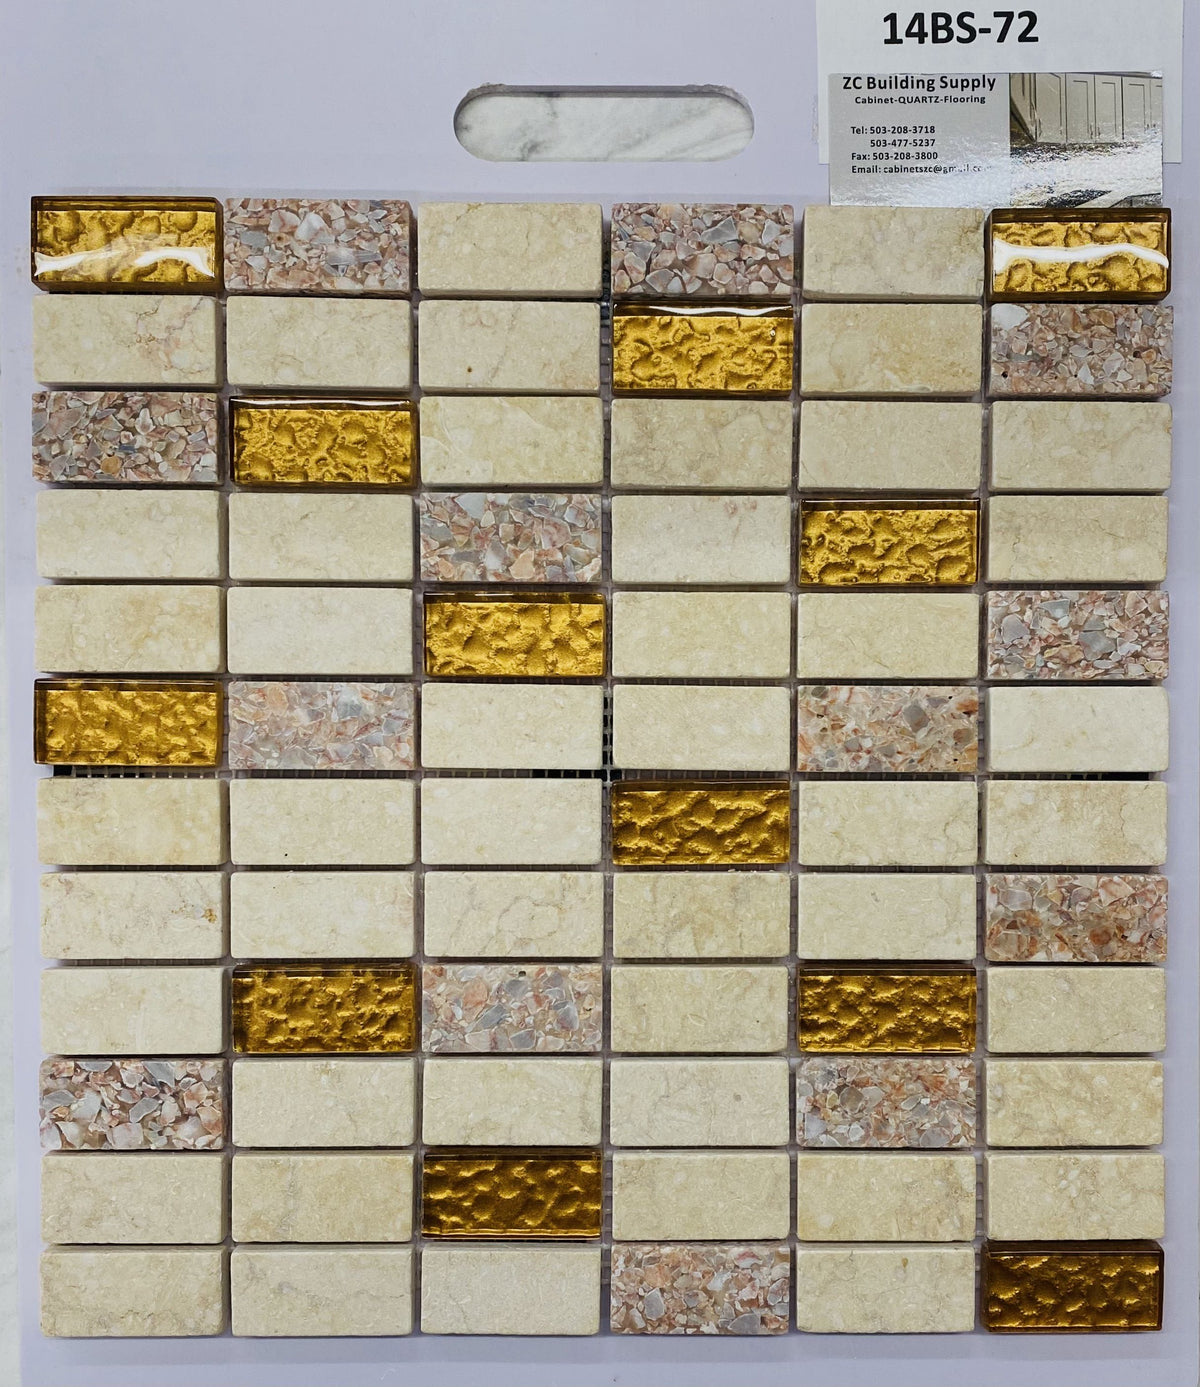 Stone and Glass Tile 14BS72 -12 inches x 12 inches